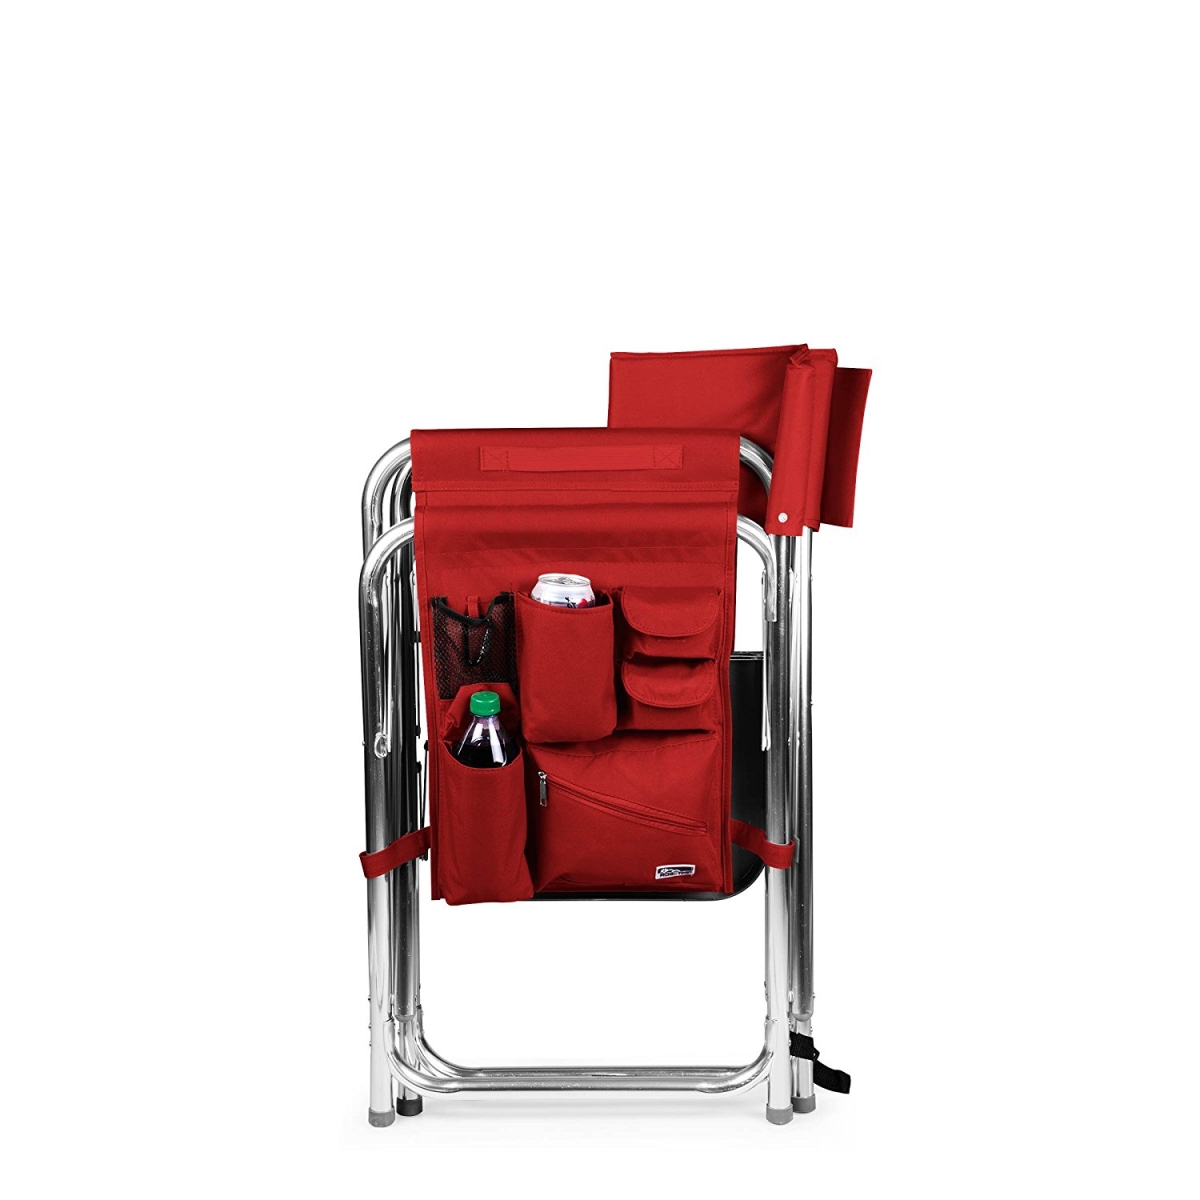 Oniva 810-17-406-000-0 Outdoor Directors Chair - Red & Black Buffalo Plaid